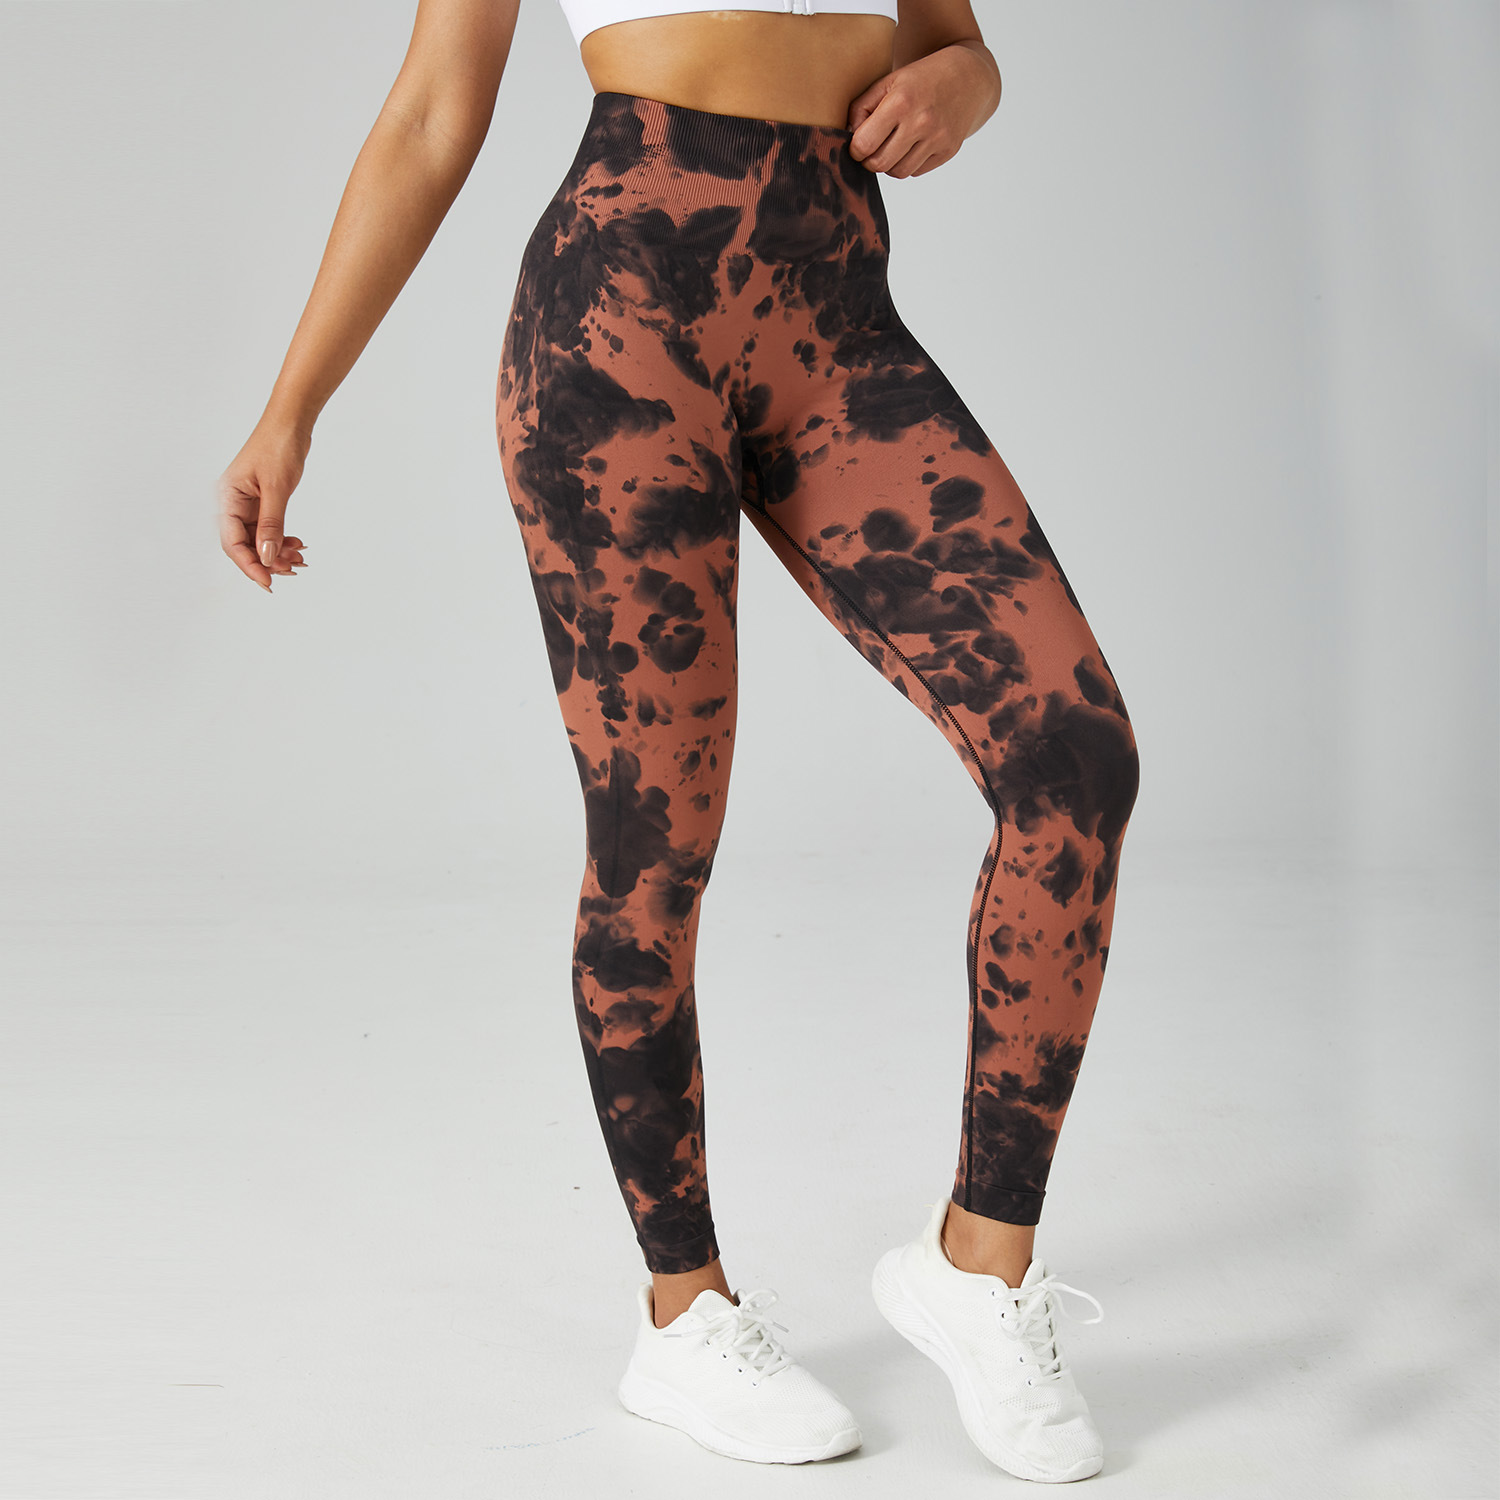 Cross-Border Seamless Binding and Bleaching Peach Hip Yoga Pants High Waist Belly Contracting Fitness Pants Women's Tie-Dyed Running Sports Tight Pants